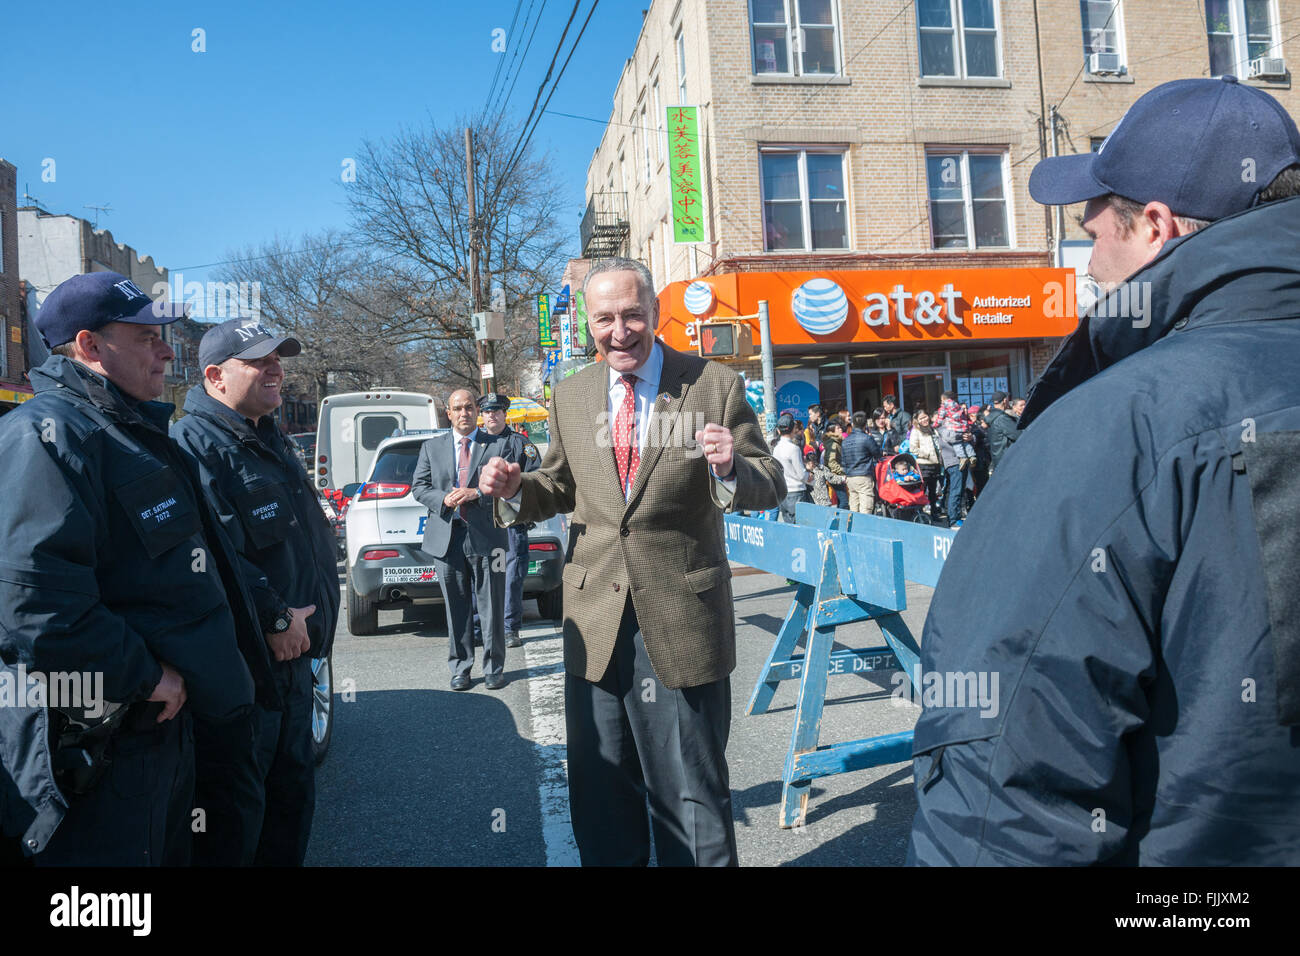 NY Senator Charles Schumer greets police officers Eighth Avenue in the Sunset Park neighborhood in Brooklyn in New York on Sunday, February 28, 2016 during the Lantern Festival street fair. Sunset Park has become Brooklyn's Chinatown as Chinese and other Asian groups have moved there and businesses have sprouted up to cater to them. (© Richard B. Levine) Stock Photo